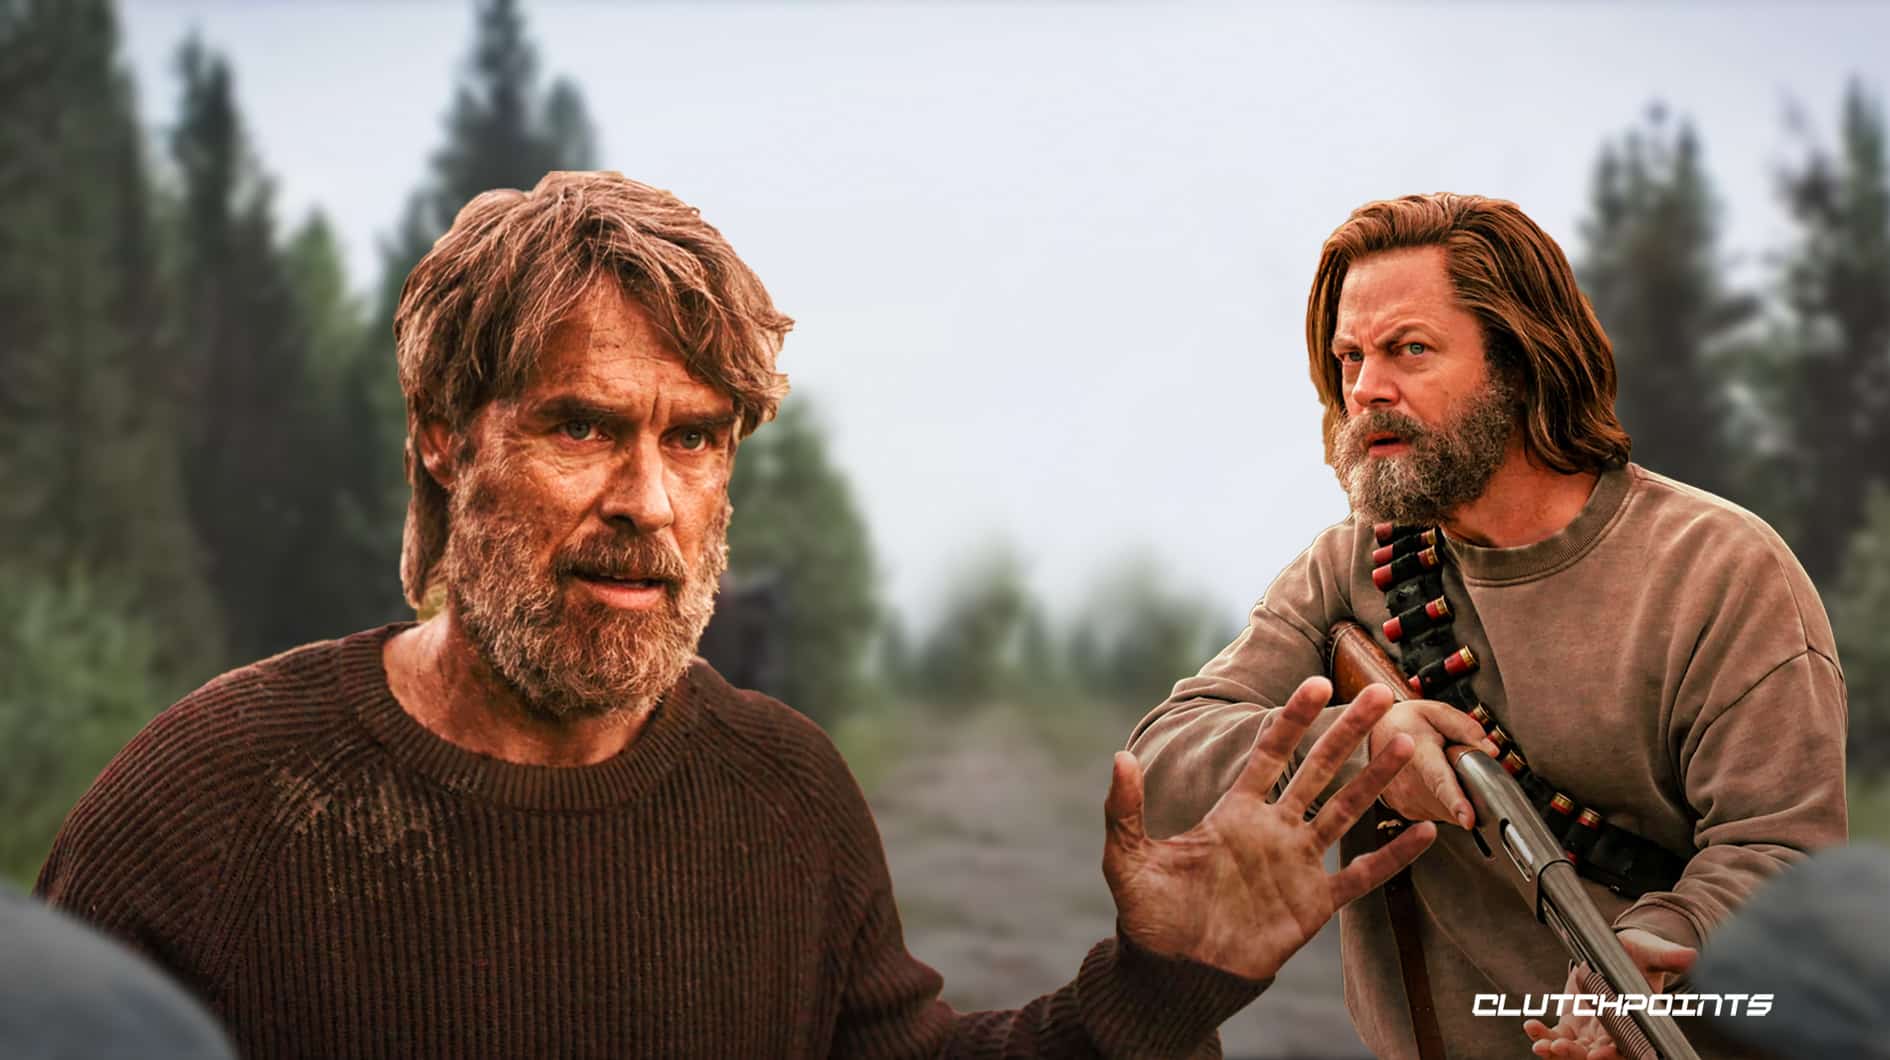 The Last Of Us episode 3 cast: Introducing Bill and Frank